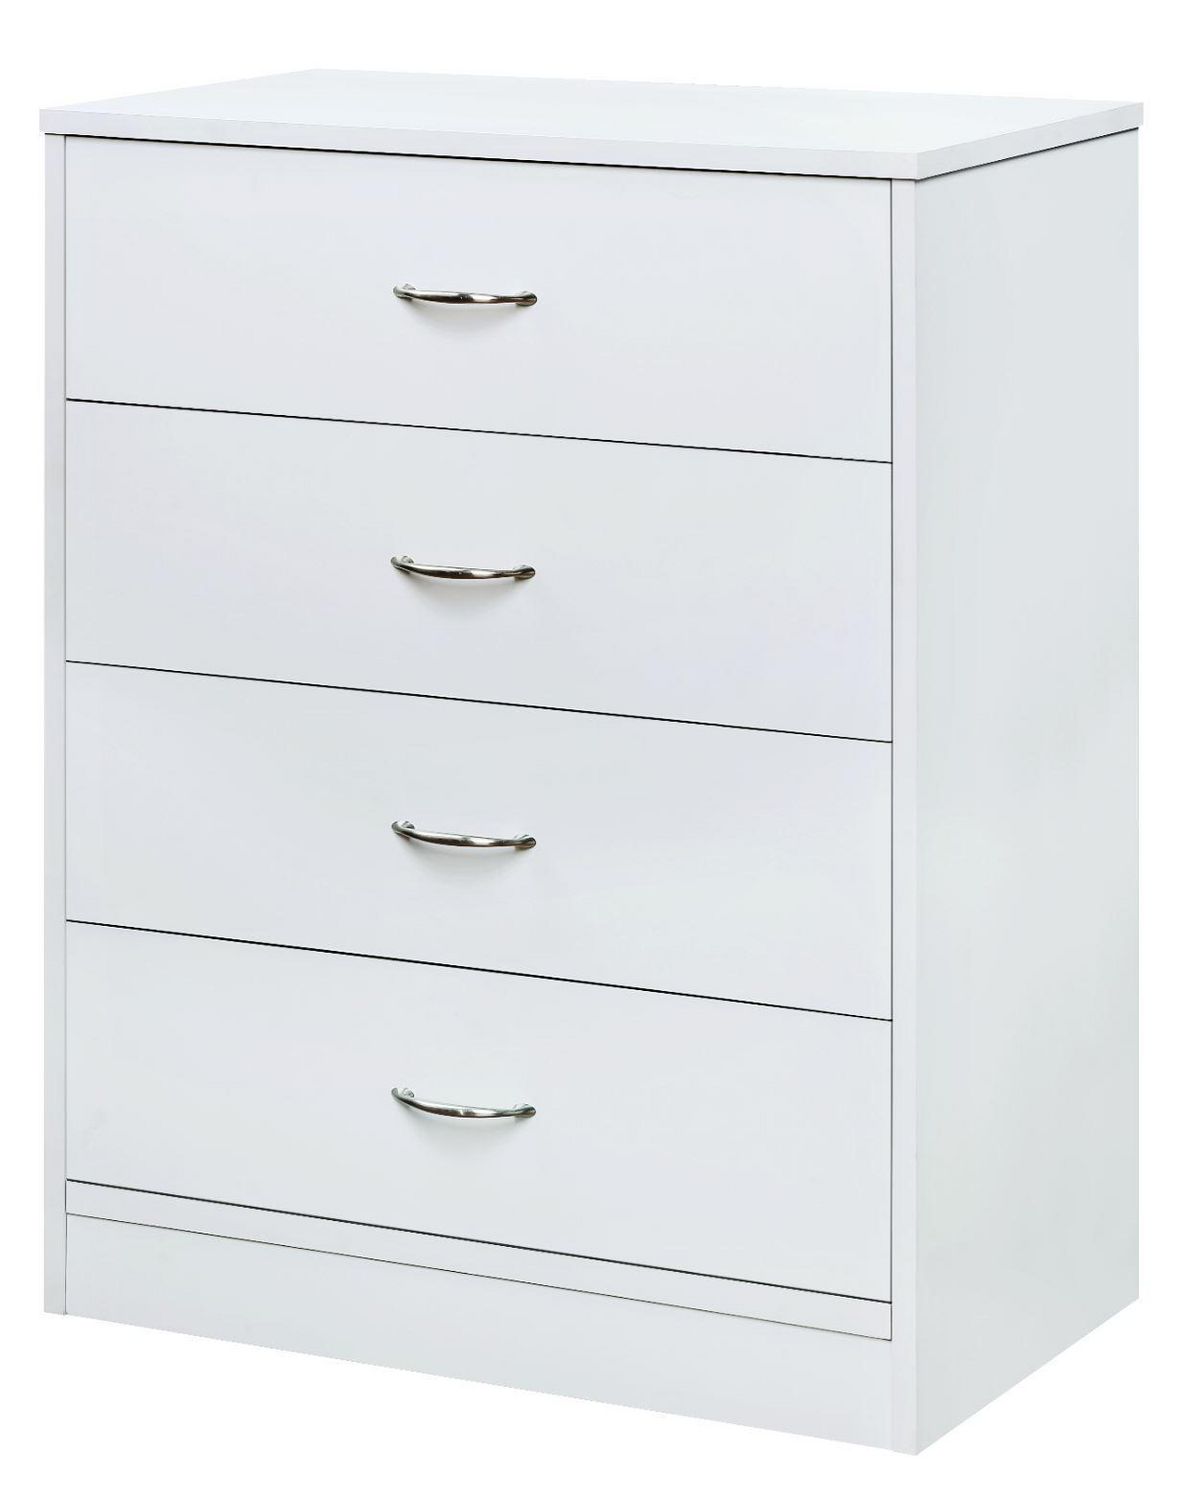 Ms 4 Drawer Dresser White Canada, Dresser With Drawers On Both Sides